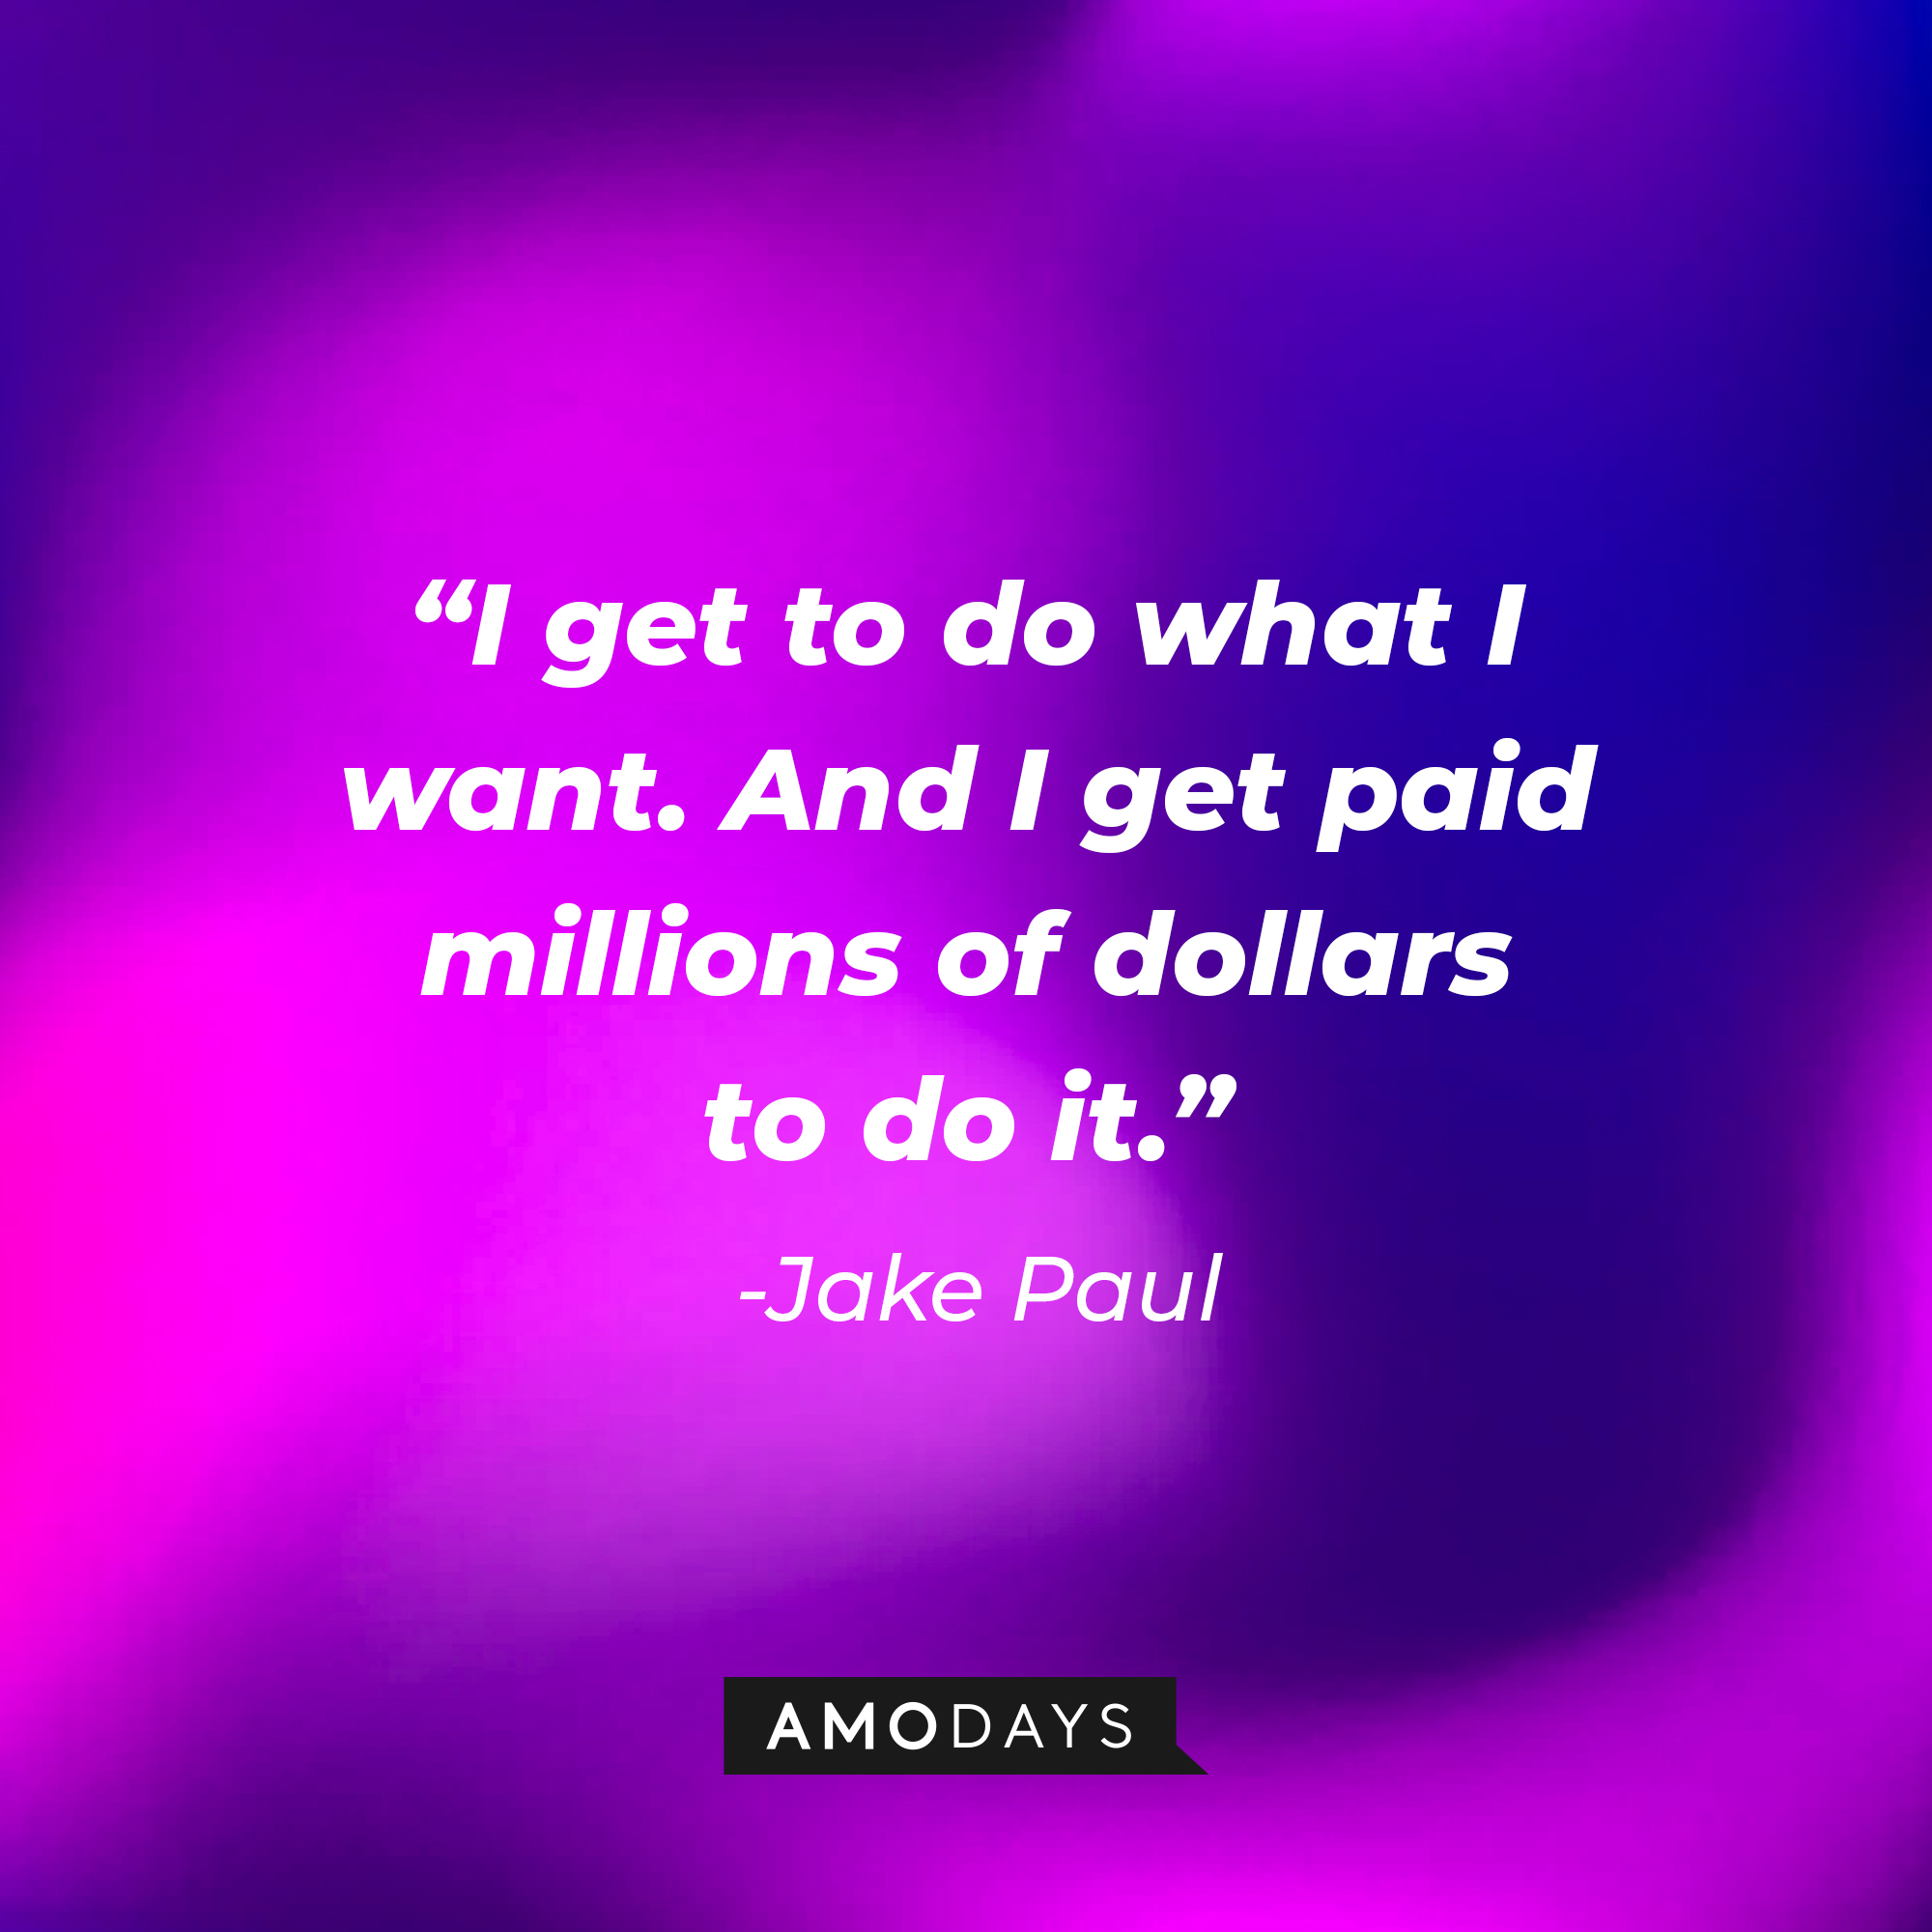 Jake Paul’s quote: "I get to do what I want. And I get paid millions of dollars to do it." | Image: Amodays